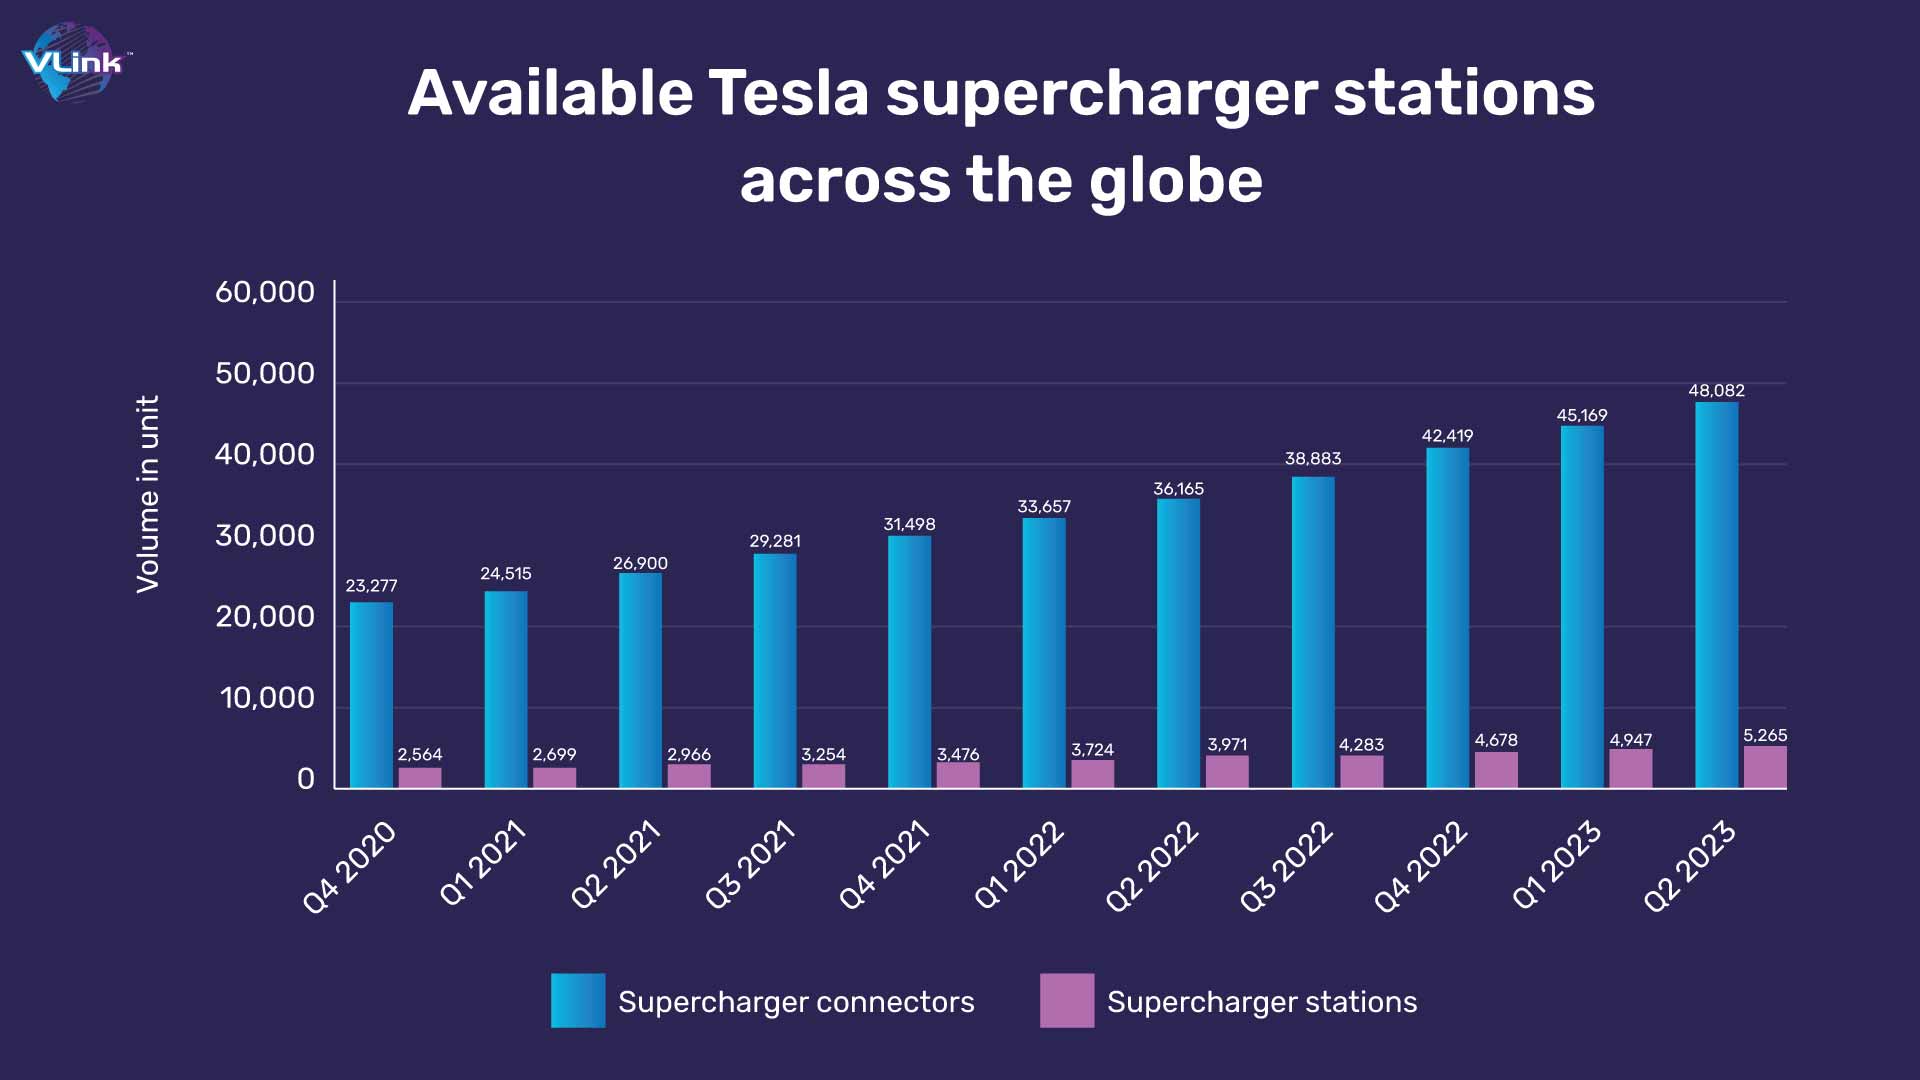 Available Tesla supercharger stations across the globe